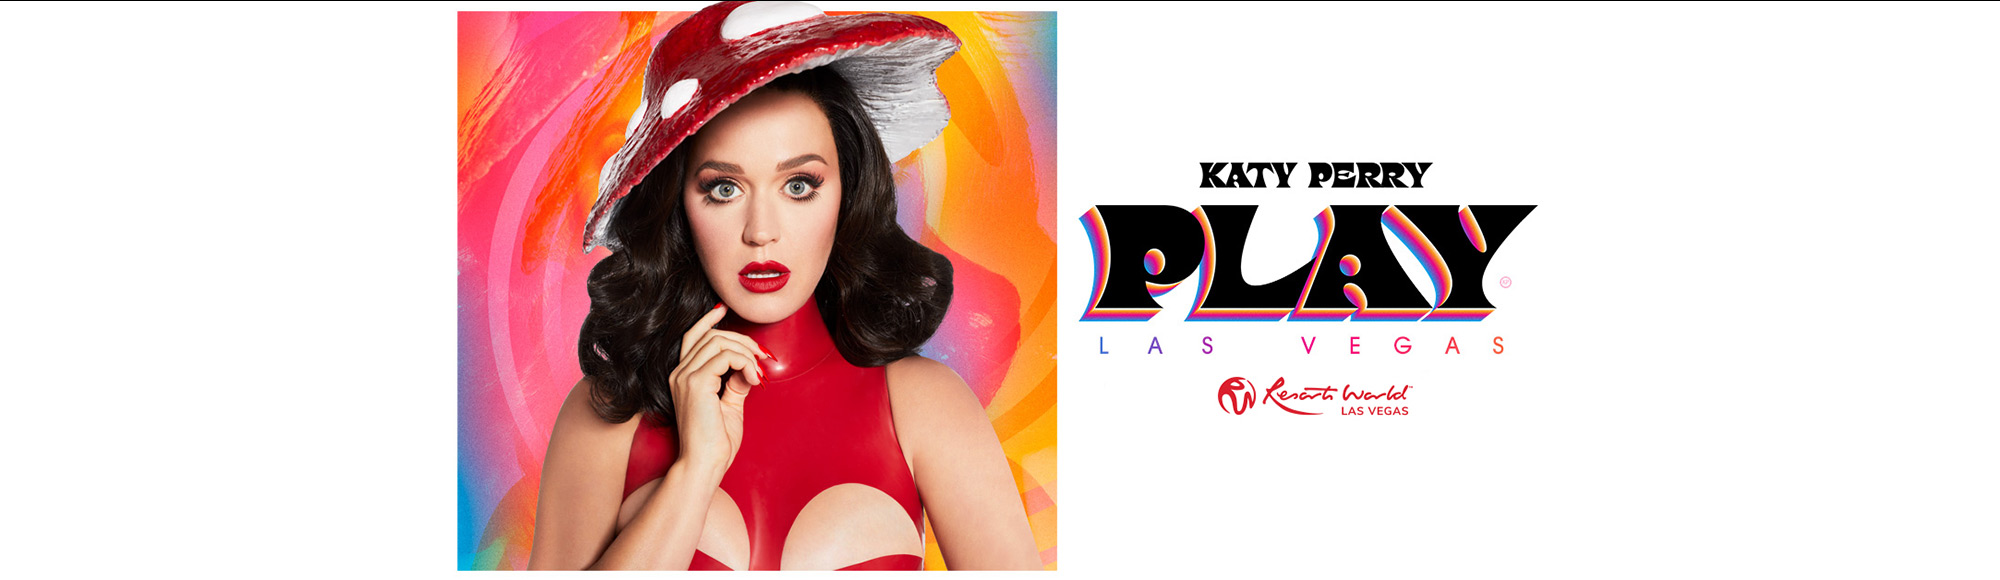 Katy Perry: PLAY show